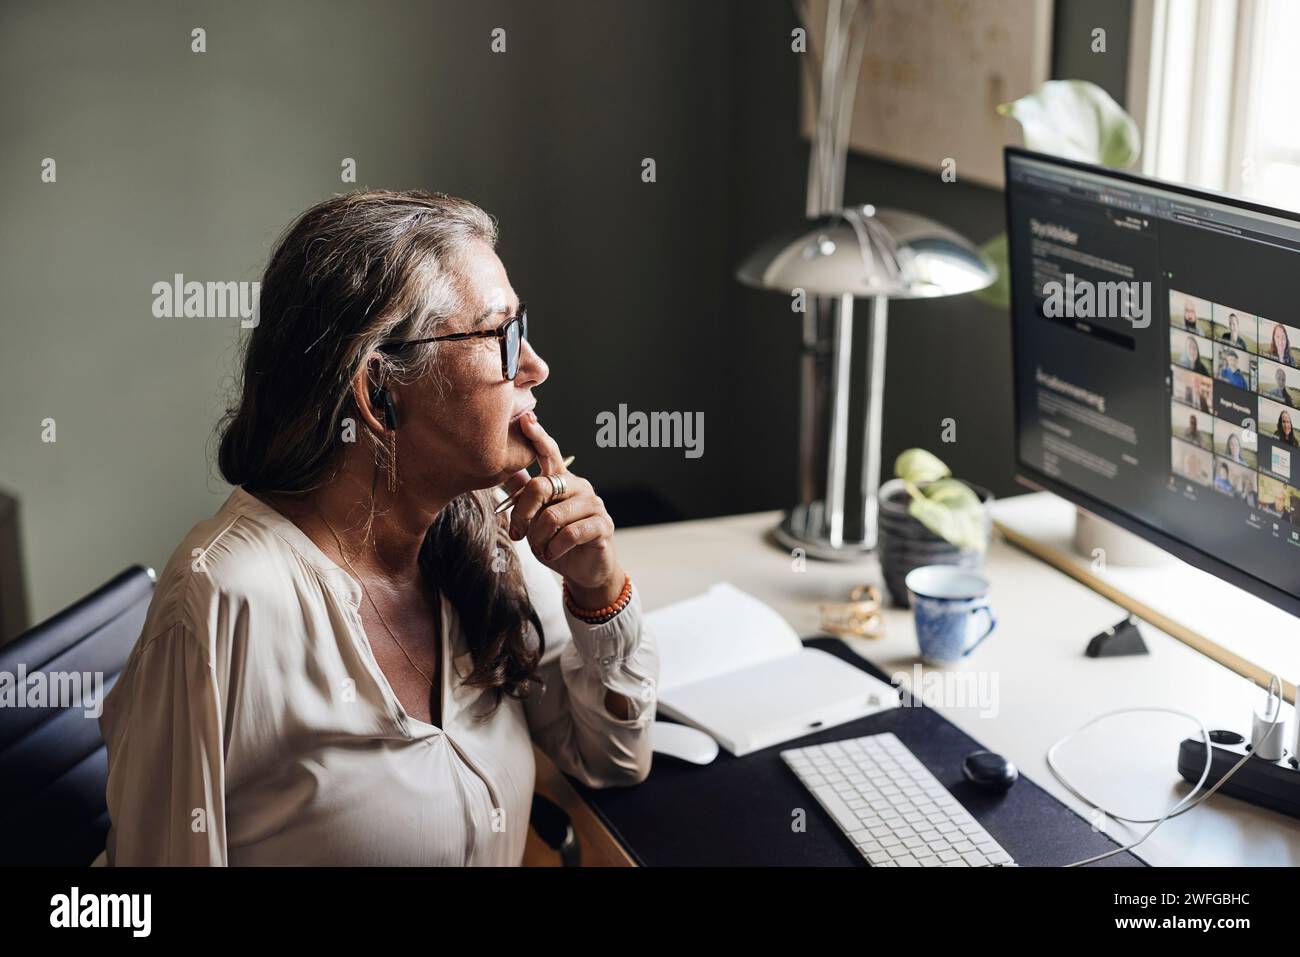 Businesswoman with hand on chin during video conference on computer at home office Stock Photo